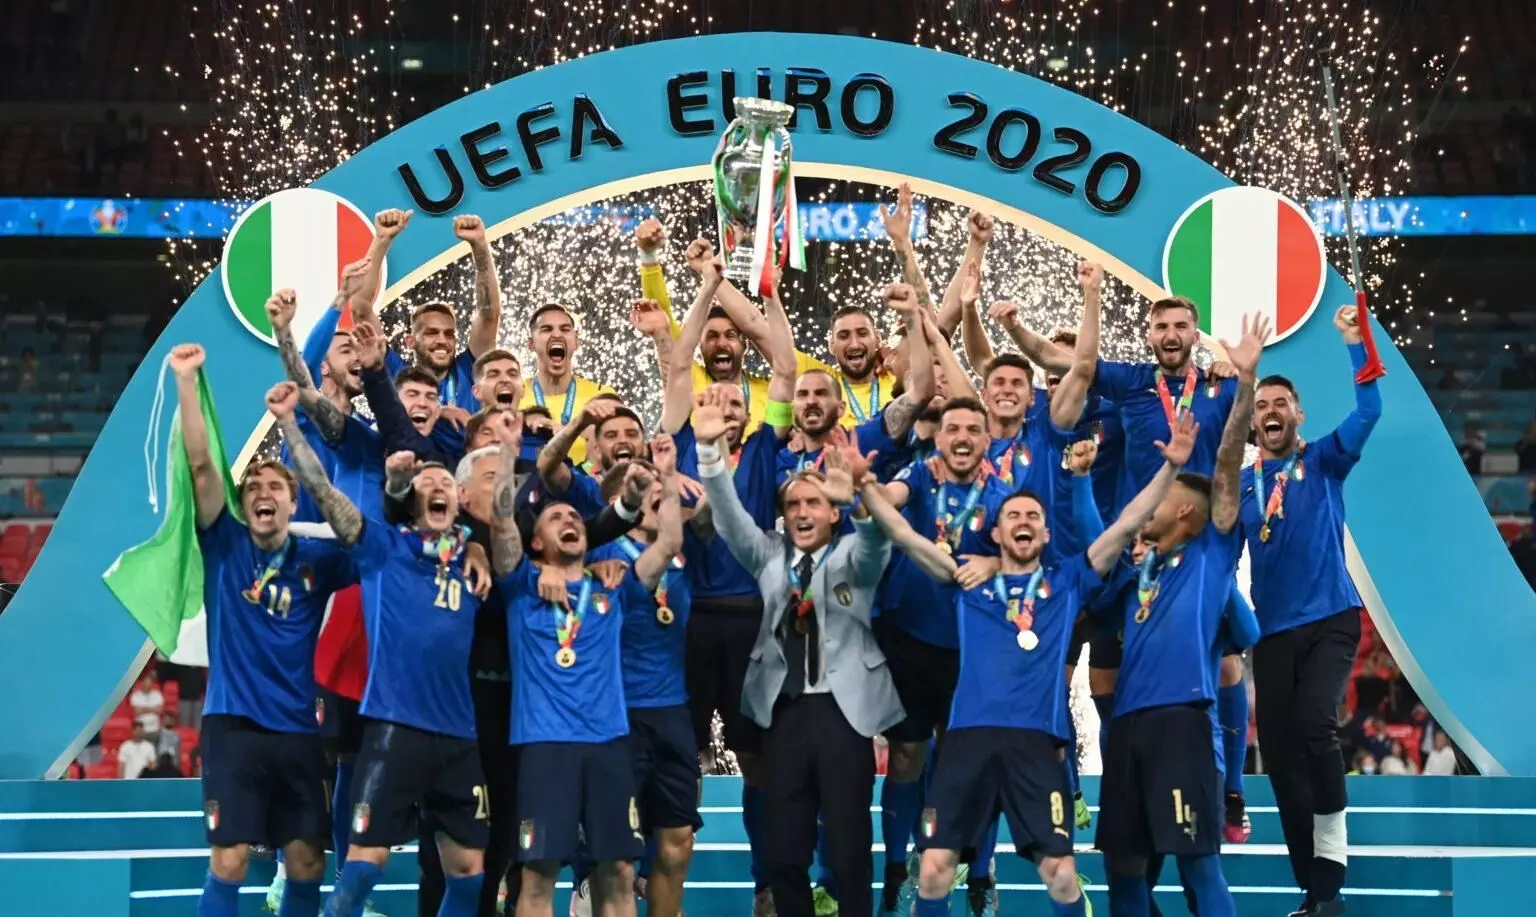 Its coming to Rome: Italy wins Euro 2020, beats England in penalty shootout